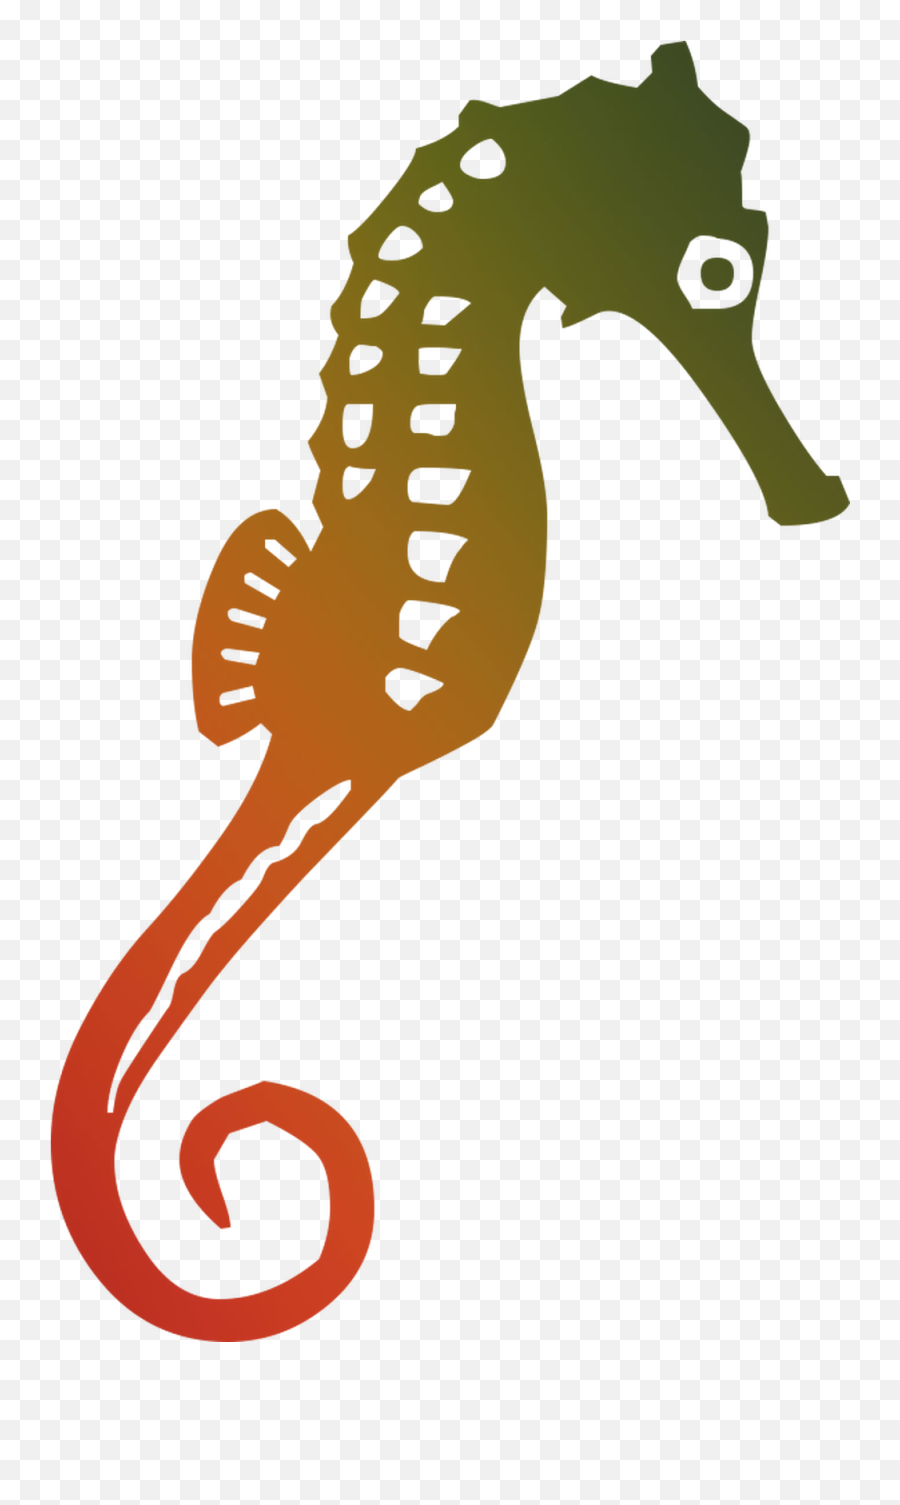 Download Seahorse Illustration Graphics Free Hq Image - Cute Drawing Cute Cartoon Seahorse Png,Seahorse Png